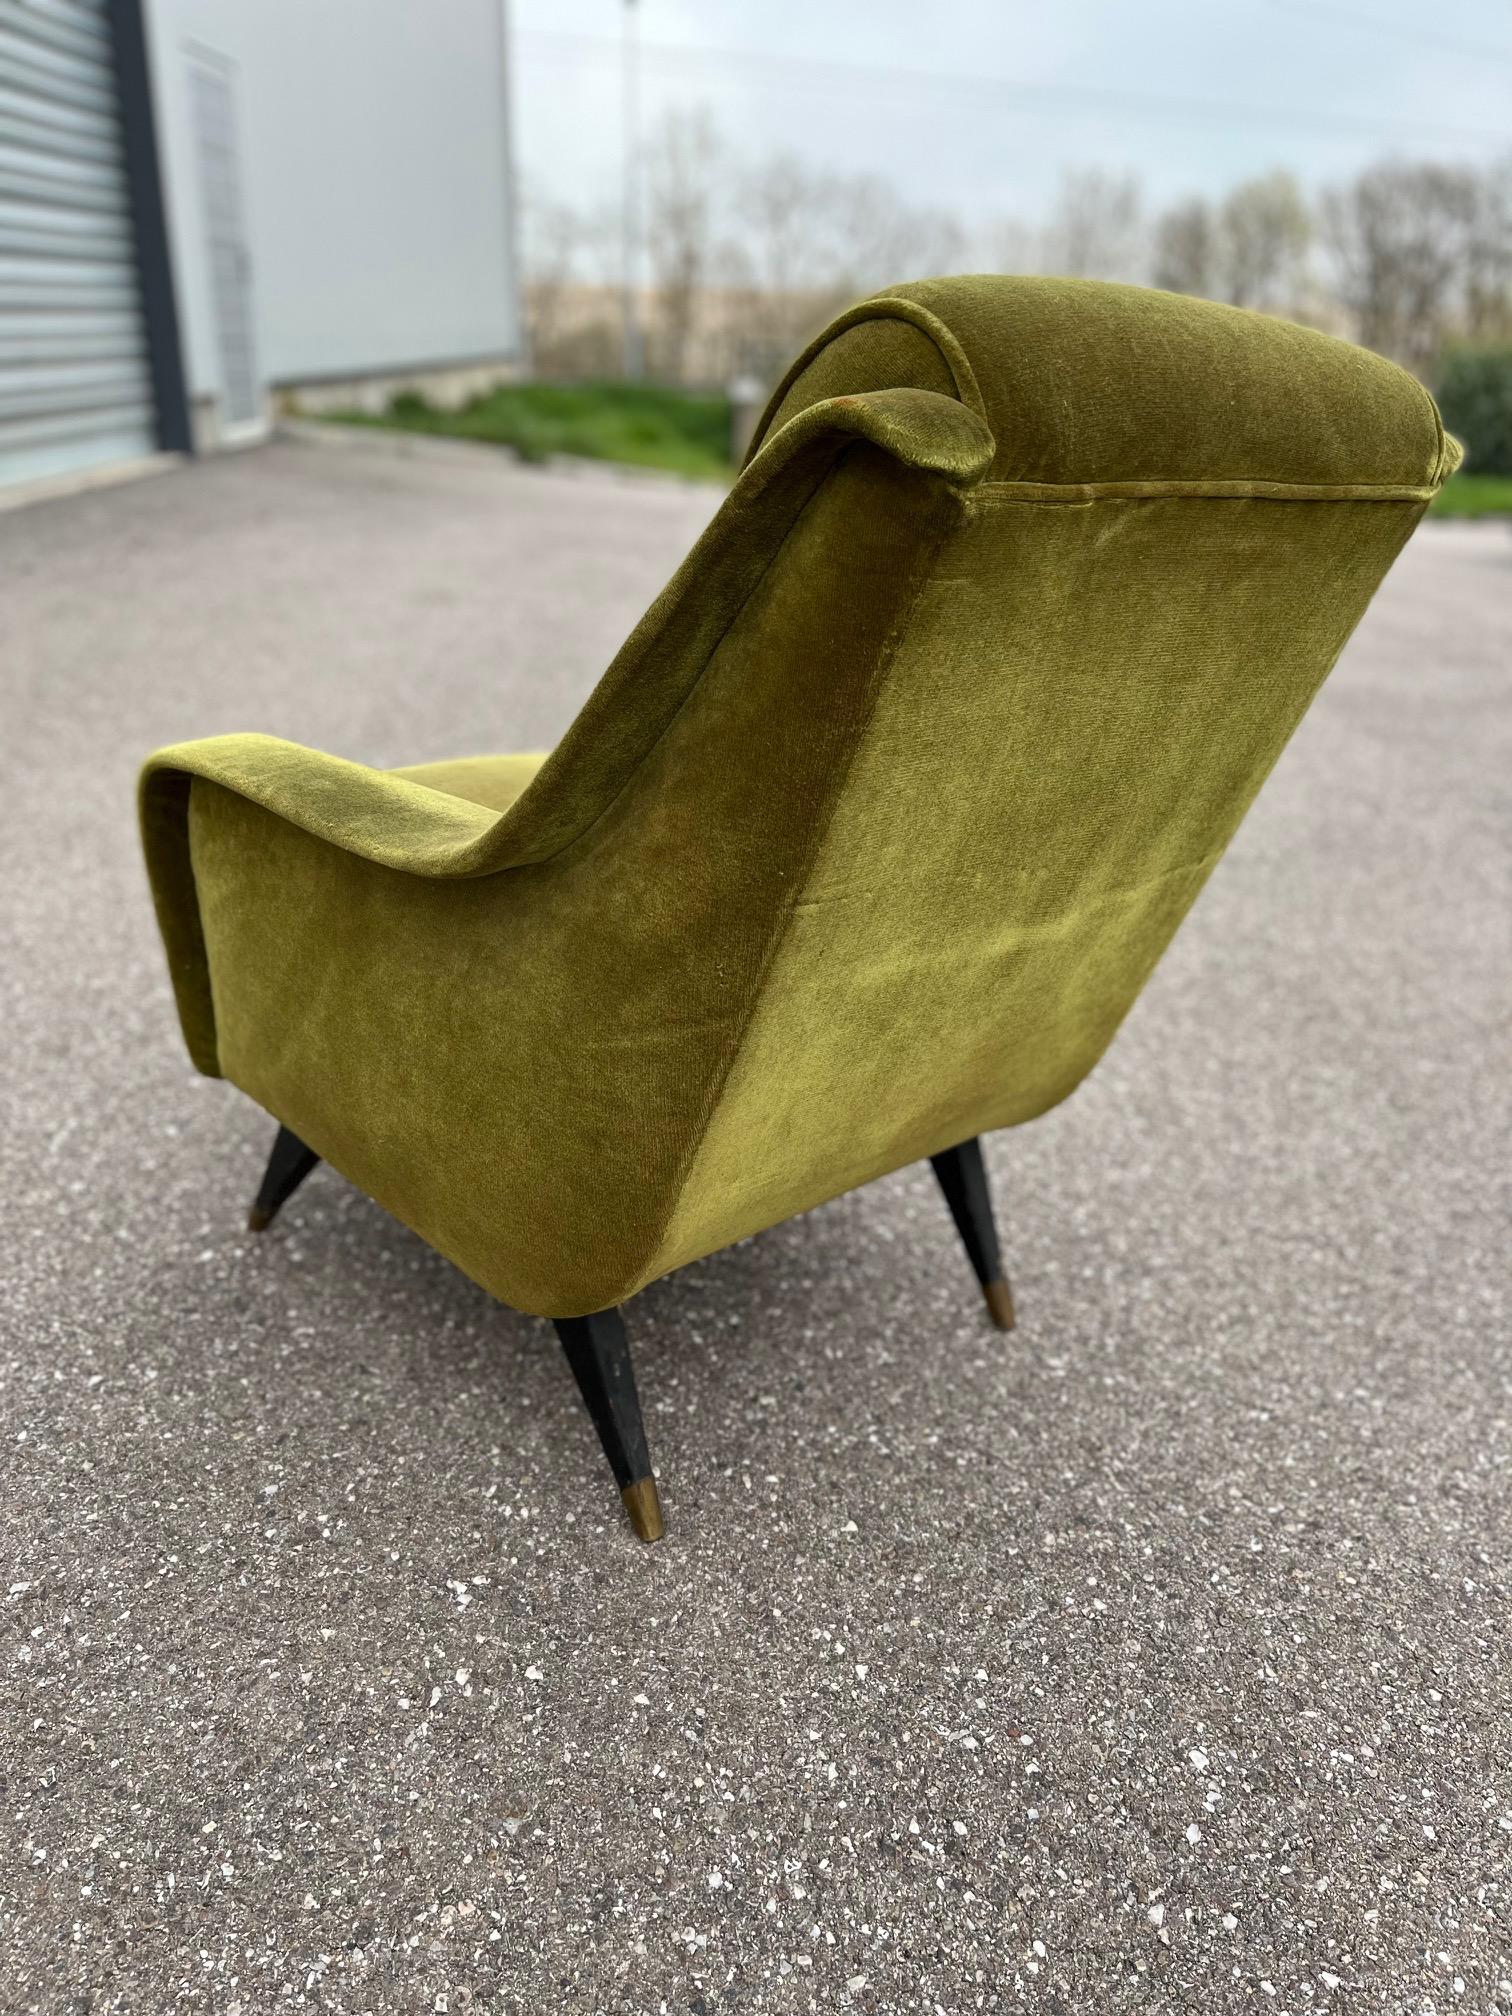 20th Century Erton Armchair from the 1950's